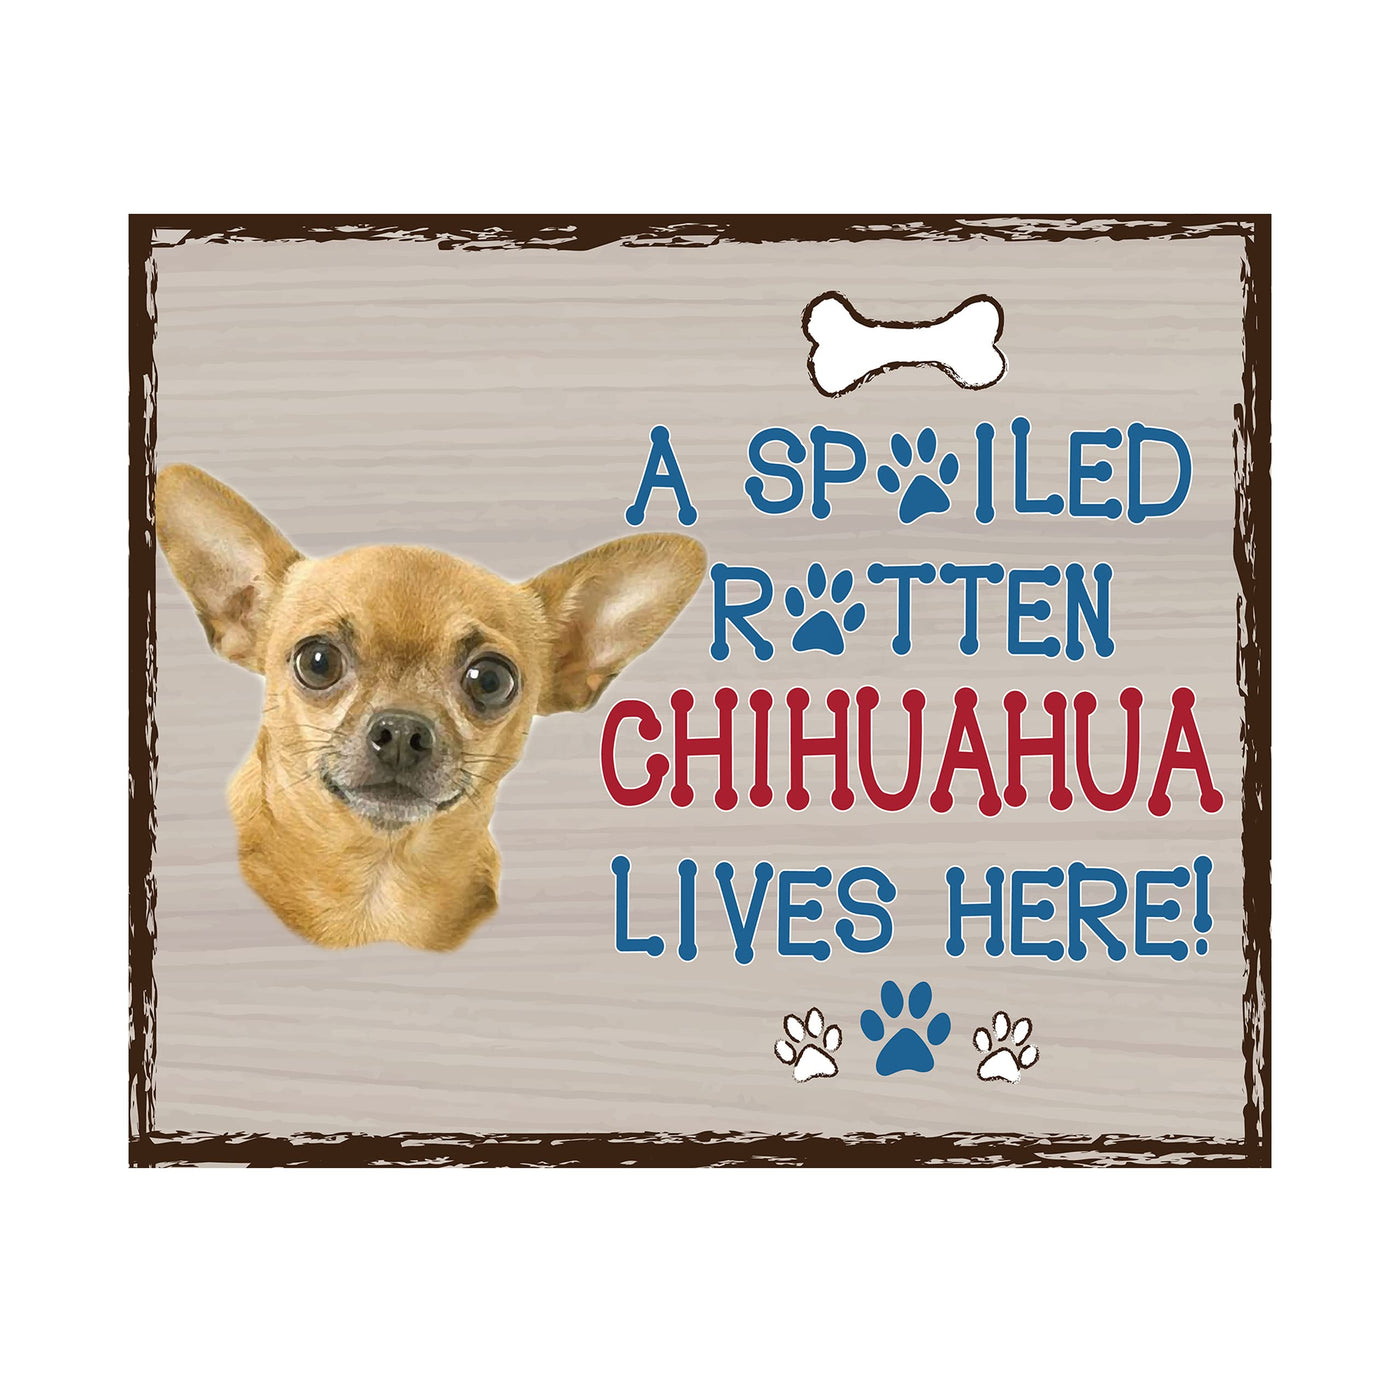 Chihuahua-Dog Poster Print-10 x 8" Wall Decor Sign-Ready To Frame."A Spoiled Rotten Chihuahua Lives Here". Perfect Pet Wall Art for Home-Kitchen-Cave-Garage. Great Gift for Chihuahua Owners!